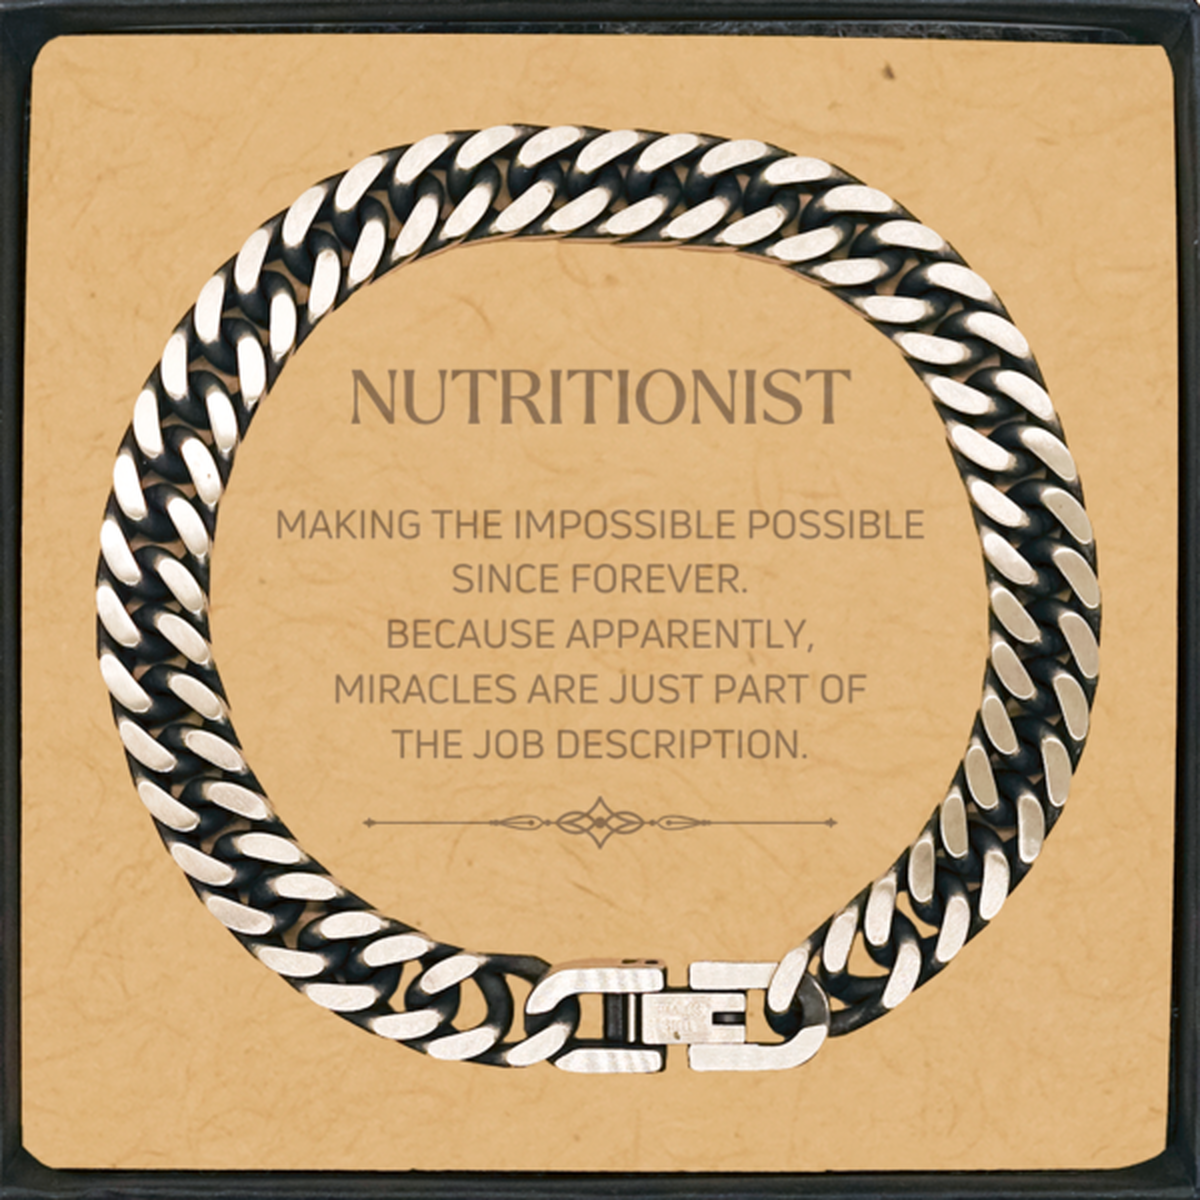 Funny Nutritionist Gifts, Miracles are just part of the job description, Inspirational Birthday Cuban Link Chain Bracelet For Nutritionist, Men, Women, Coworkers, Friends, Boss